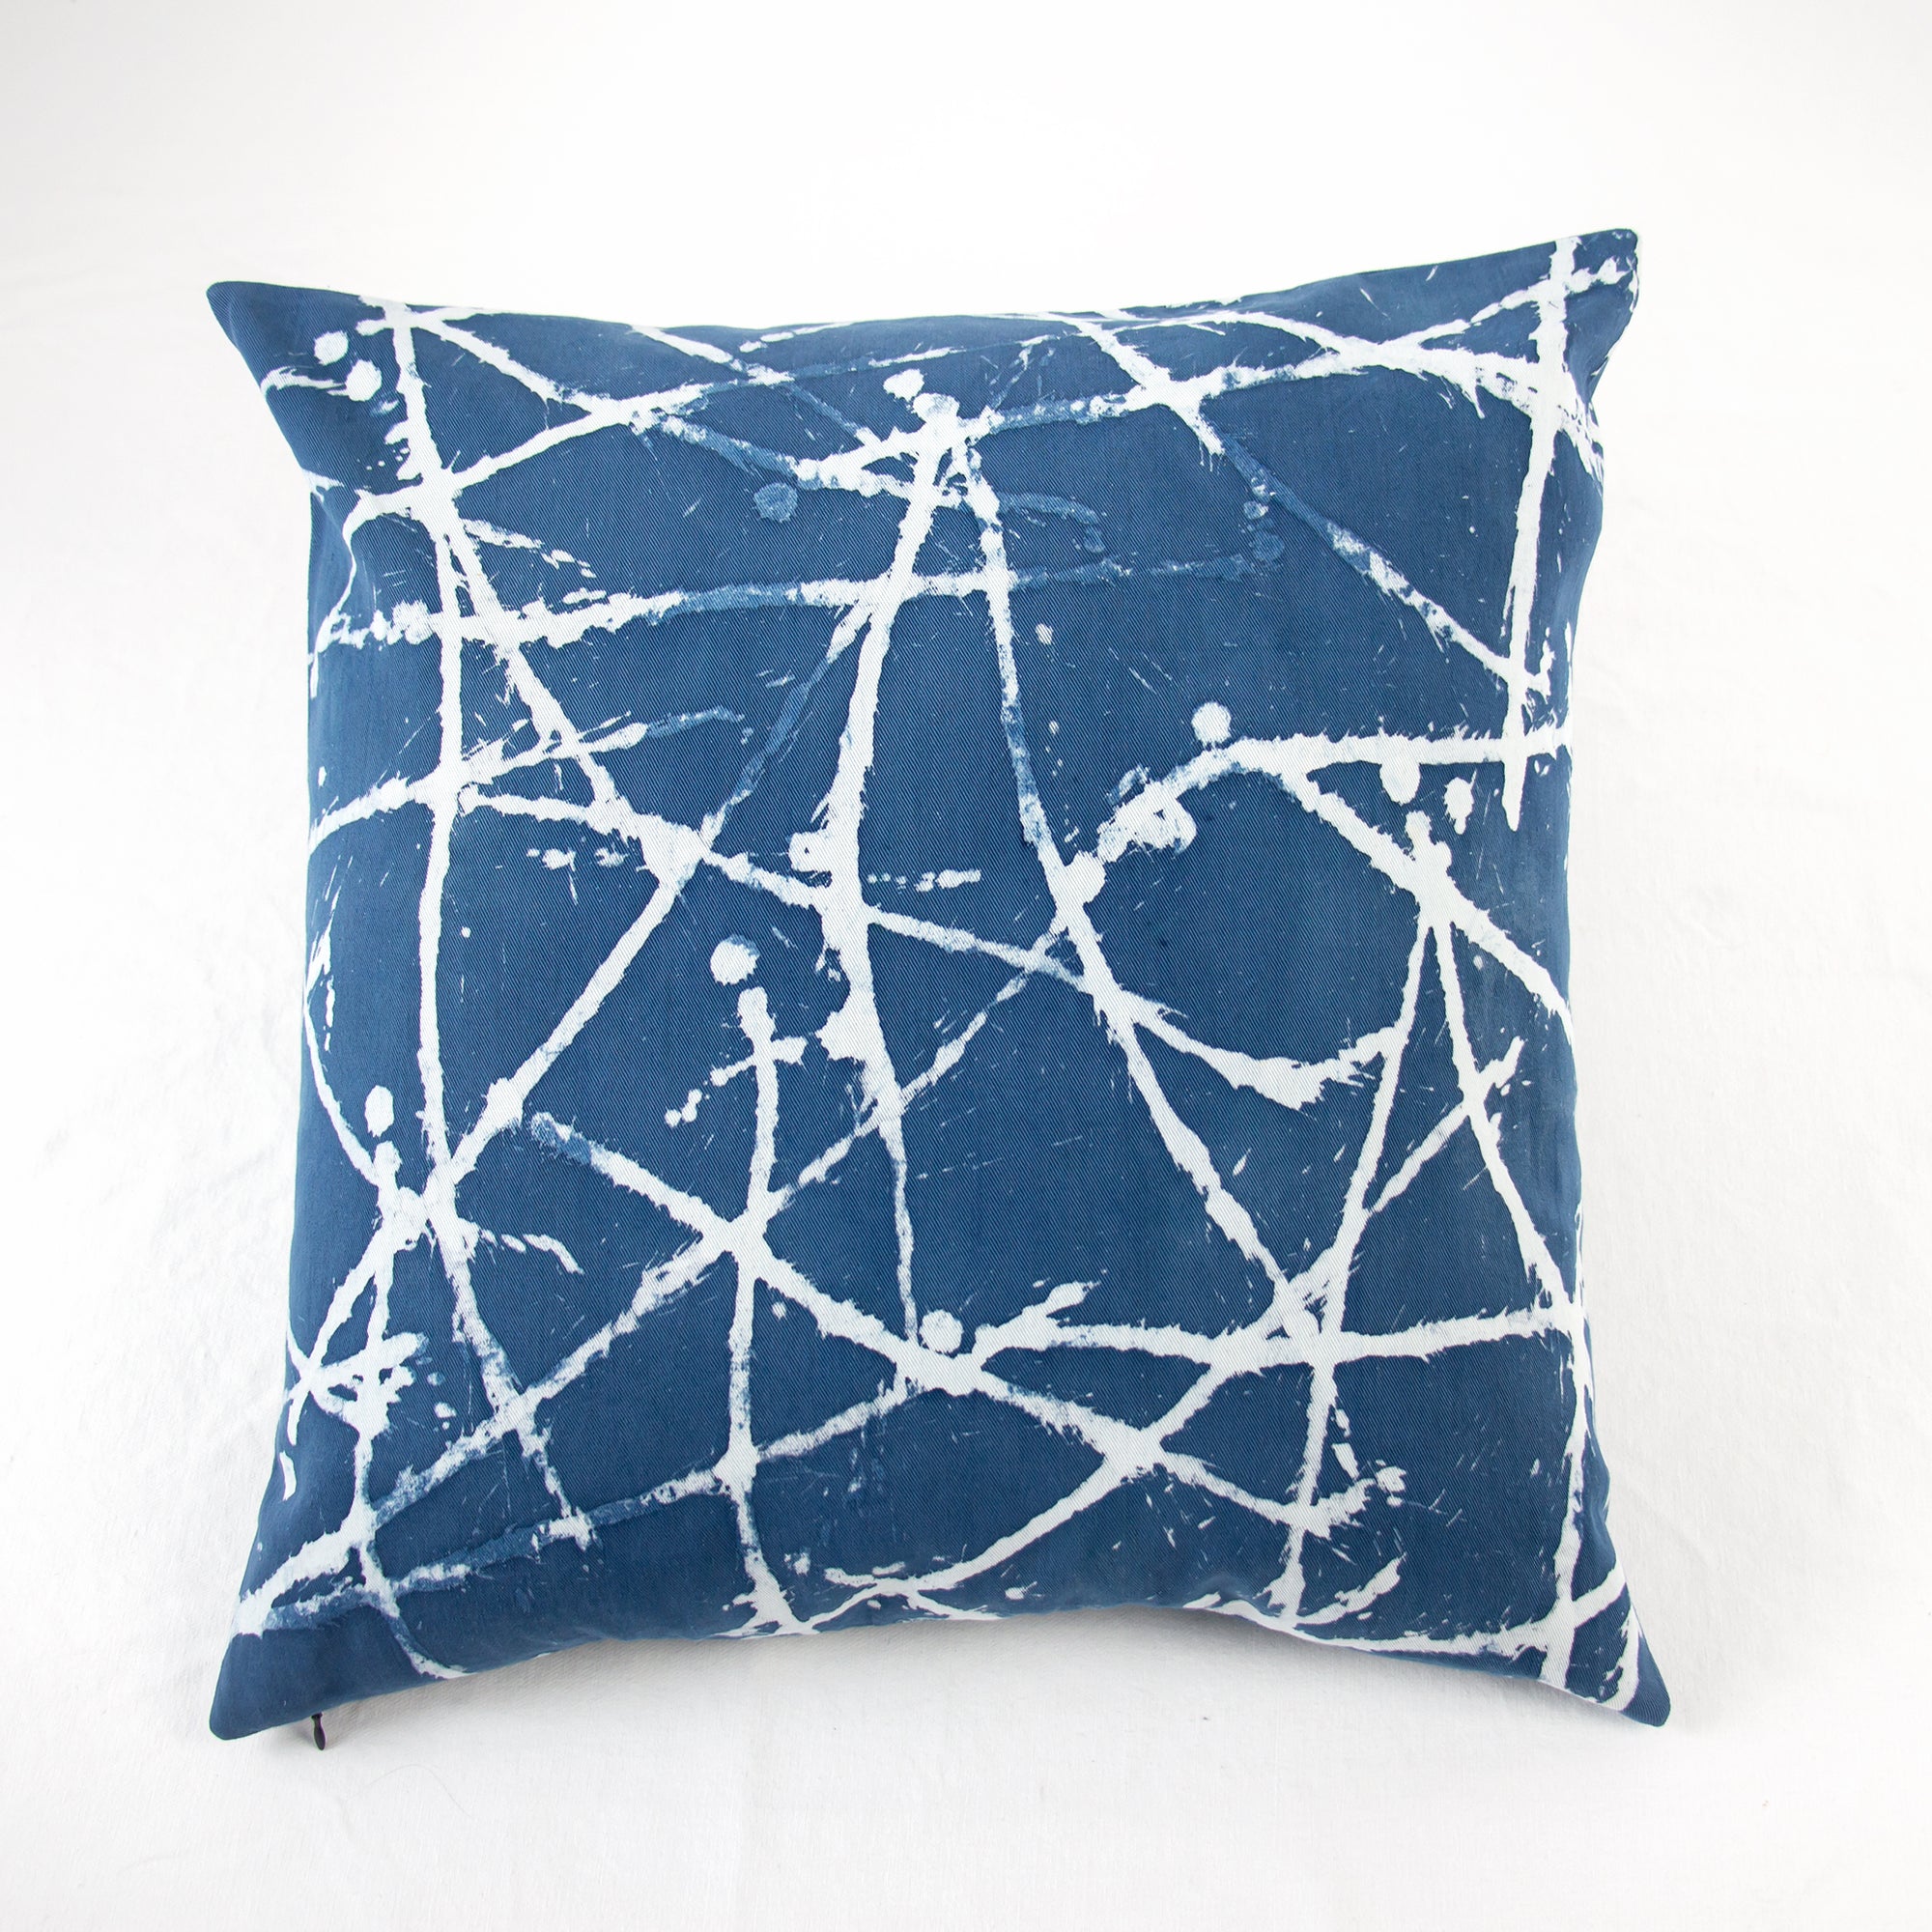 Hand Painted Accent Pillow Cover - Collide Indigo